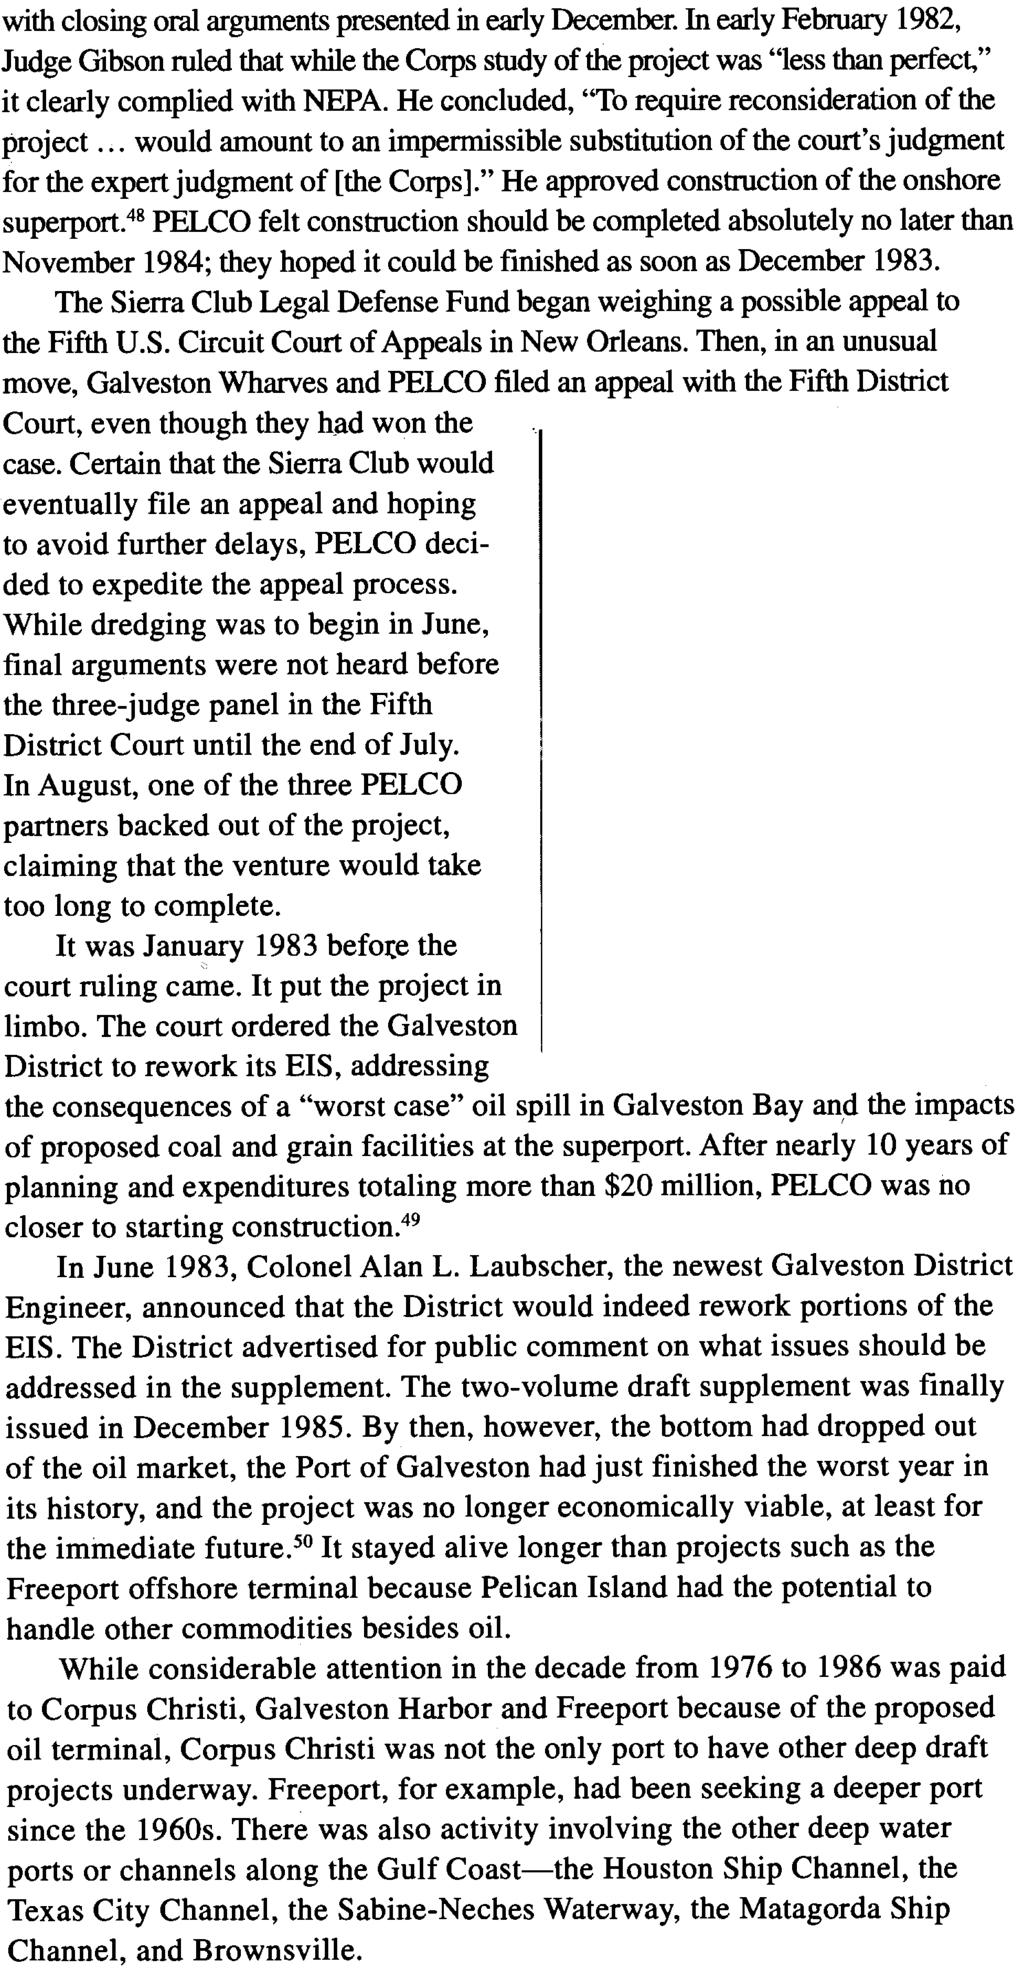 55 with closing oral arguments presented in early December. In early February 1982,Judge Gibson ruled that while the Corps study of the project was "less than perfect, " it clearly complied with NEPA.